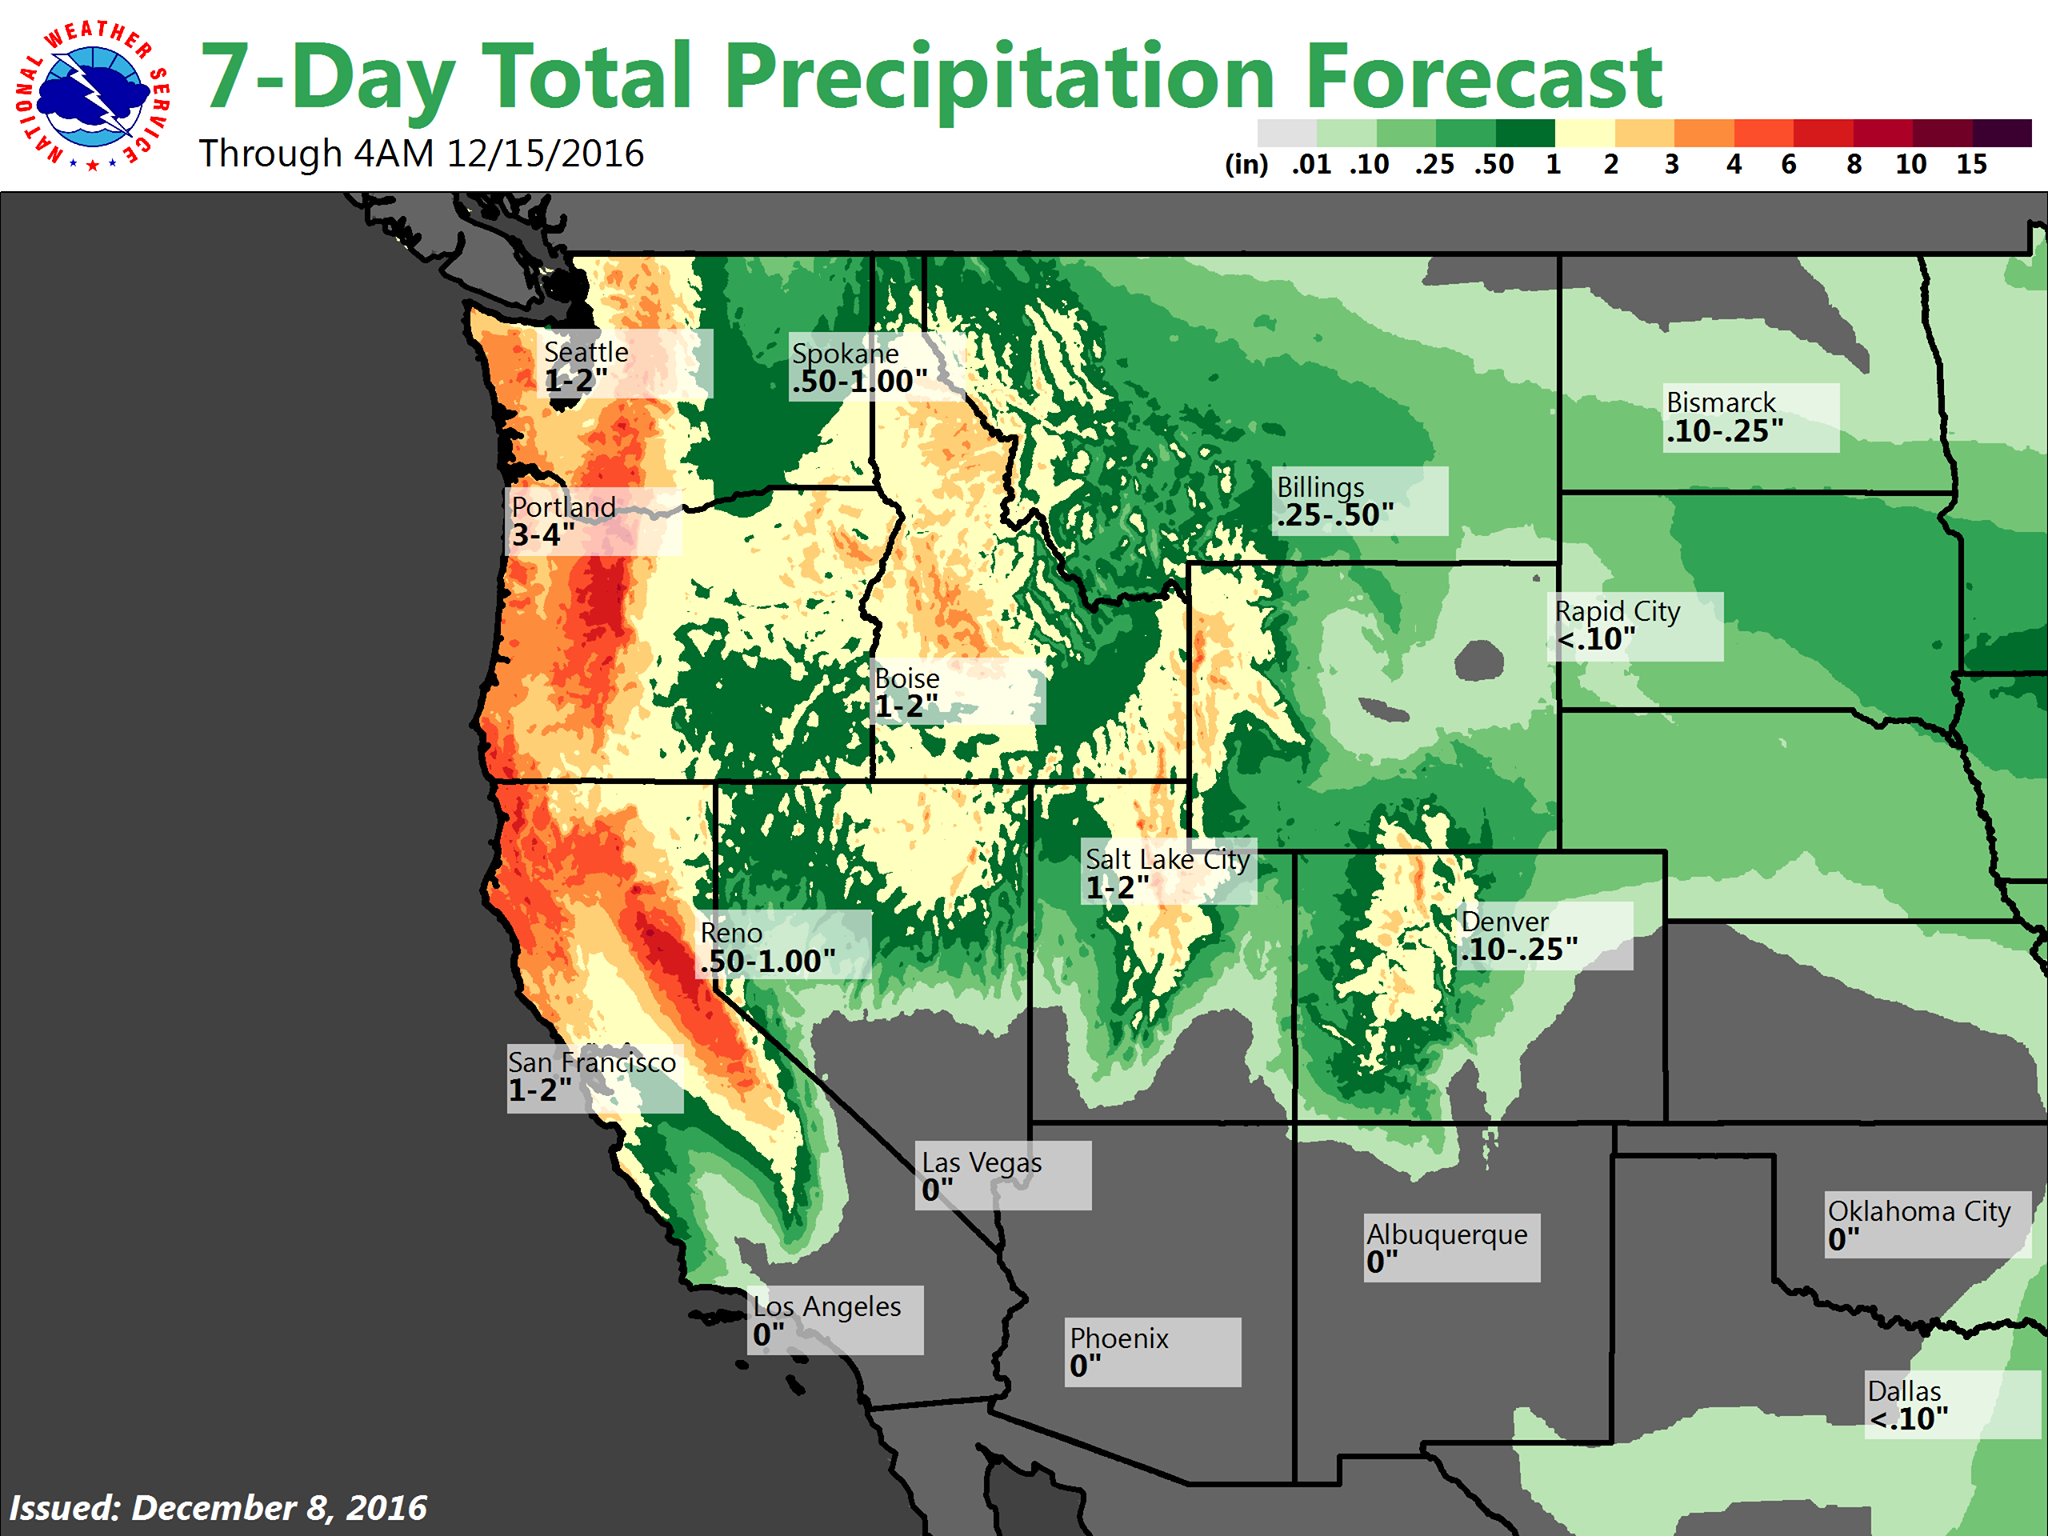 Big precip coming to the western USA with some places forecast to see over 10″ of liquid next 7 days. image: noaa, today 